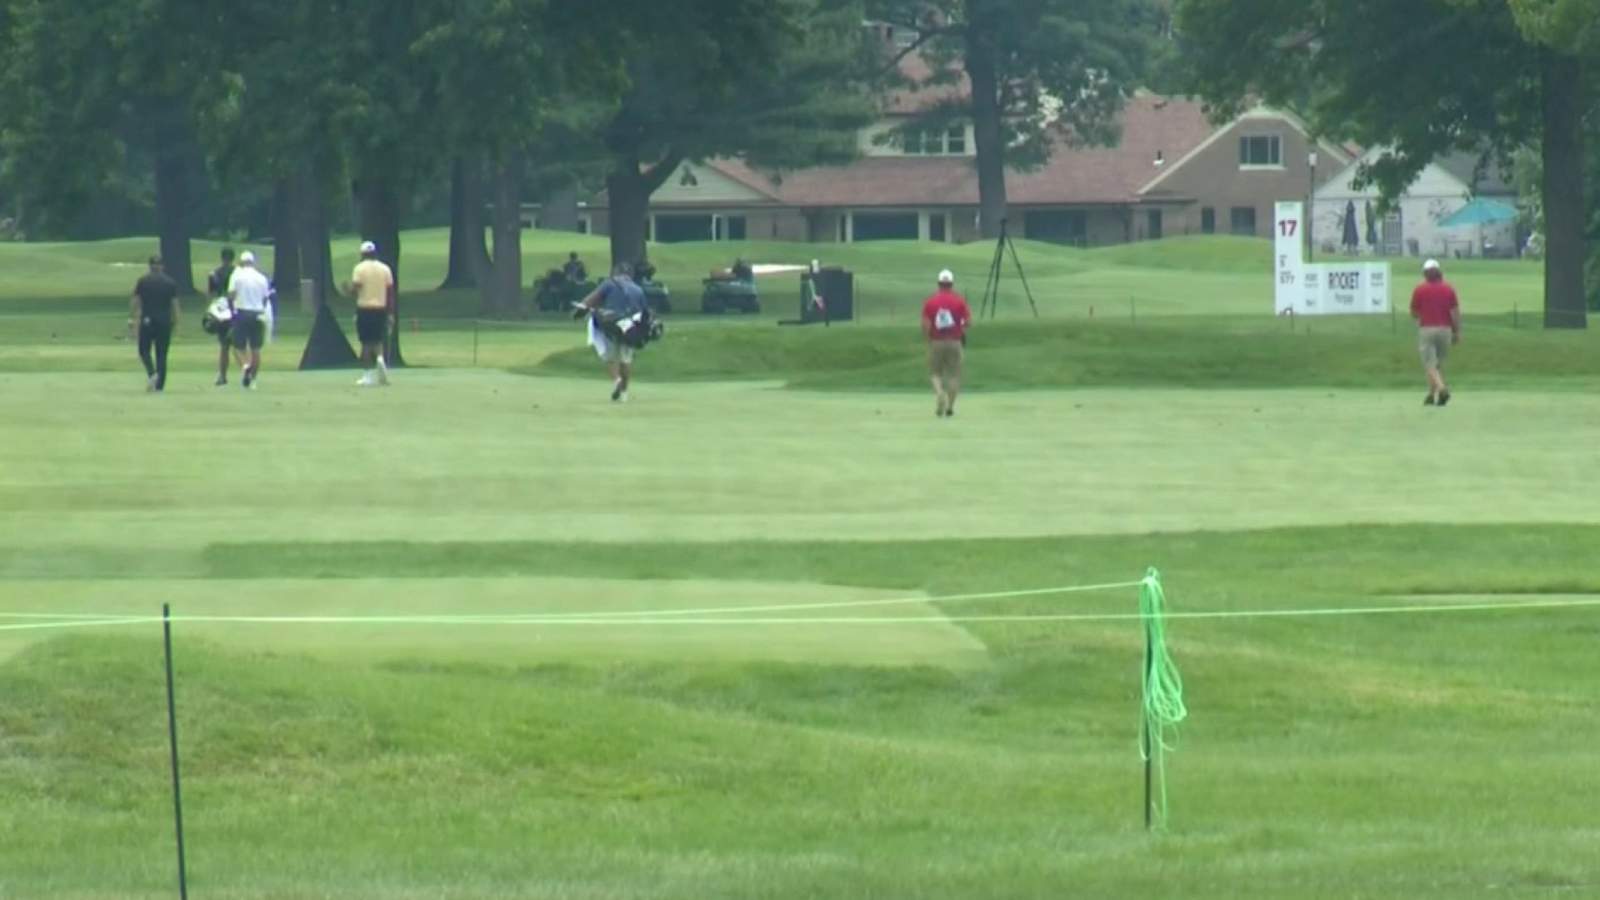 Rocket Mortgage Classic set to tee off at Detroit Golf Club